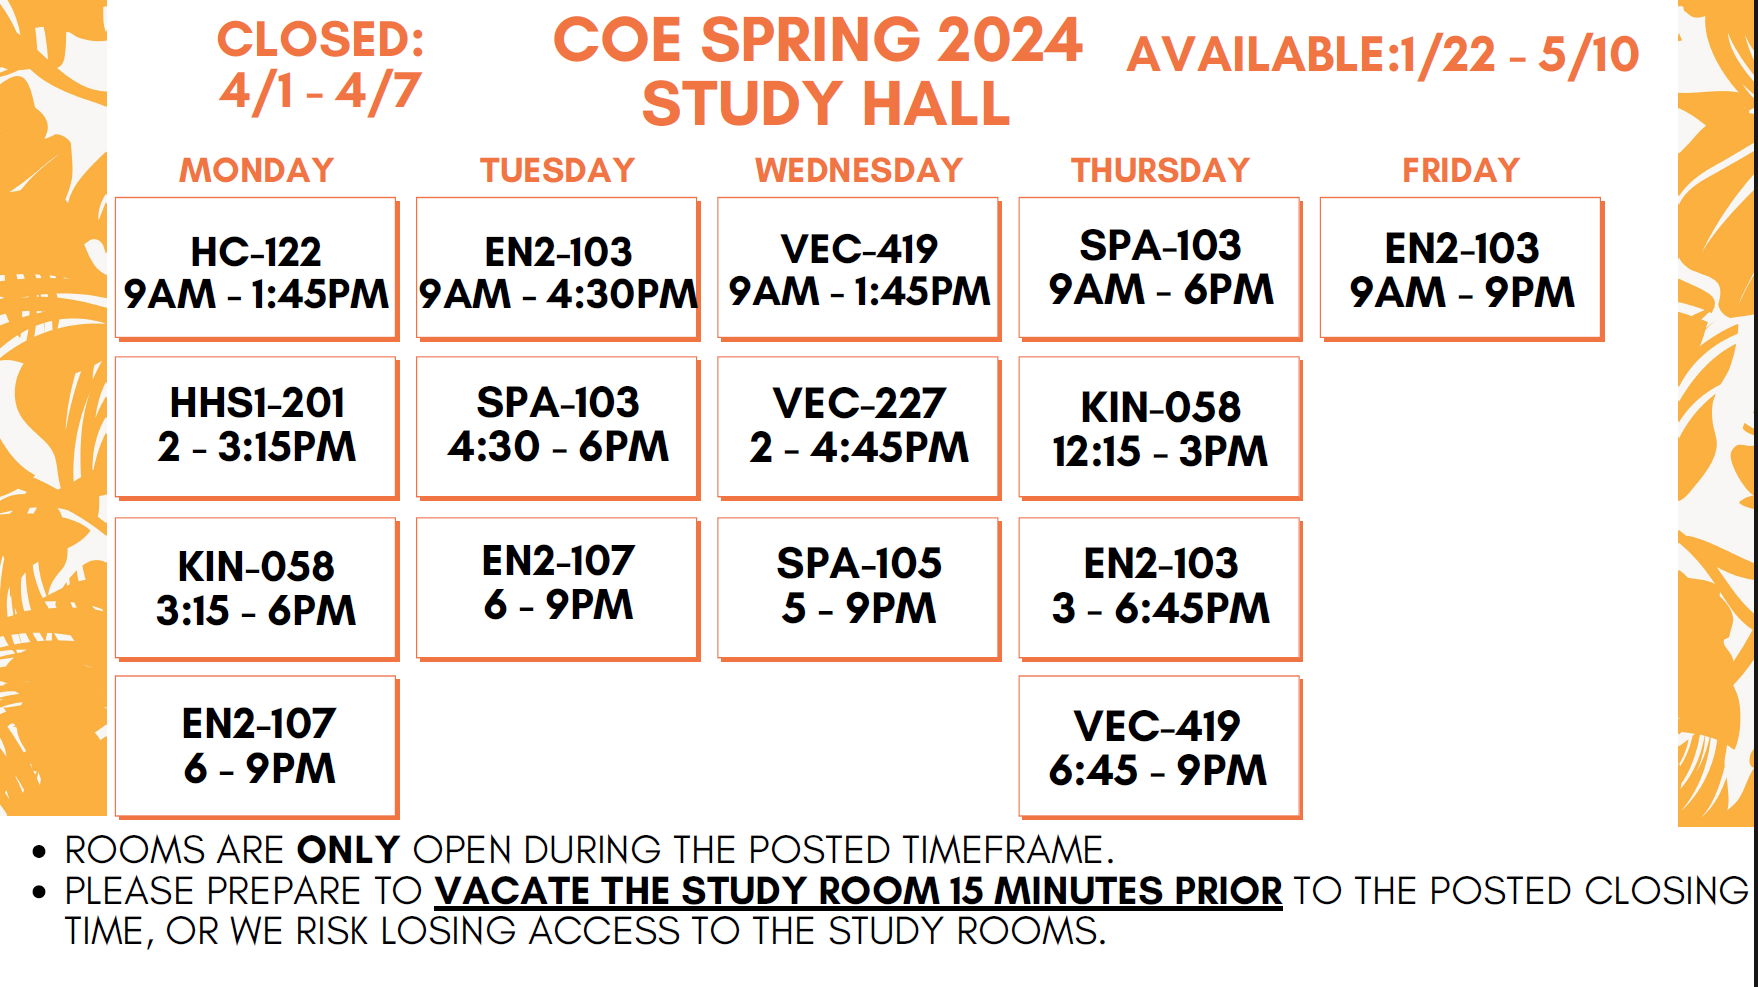 COE Spring 2024 Study Hall Schedule